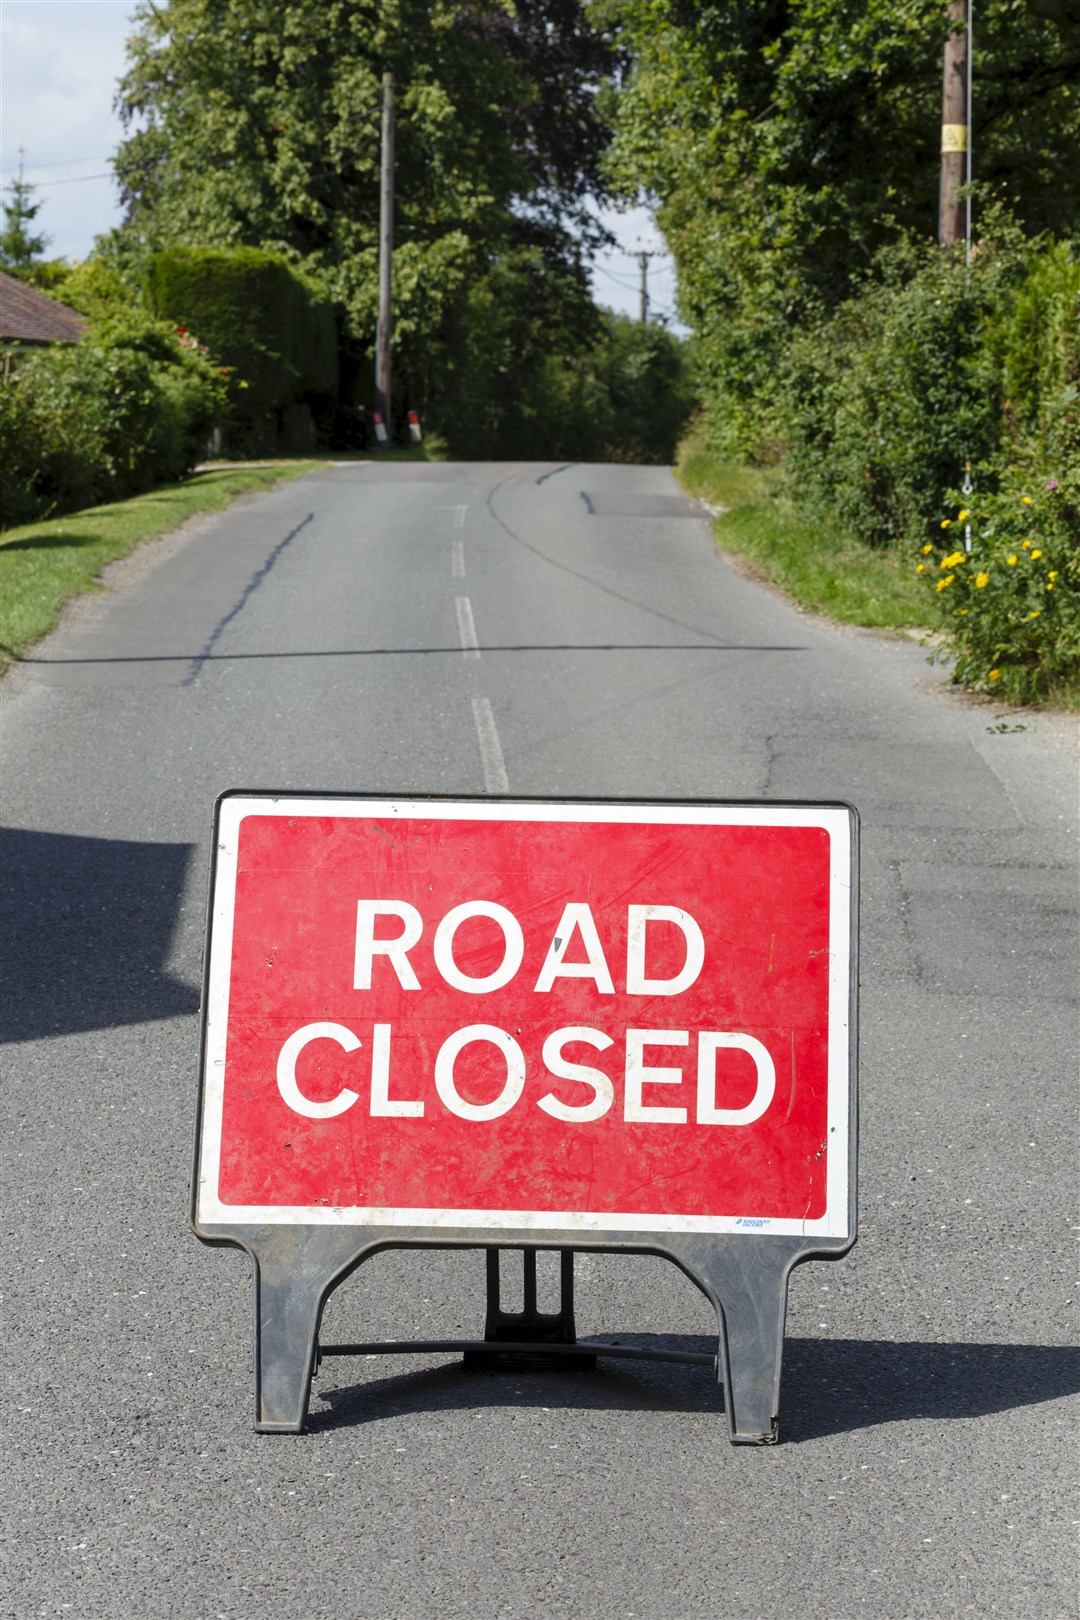 Road sign on a street showing a road closure.